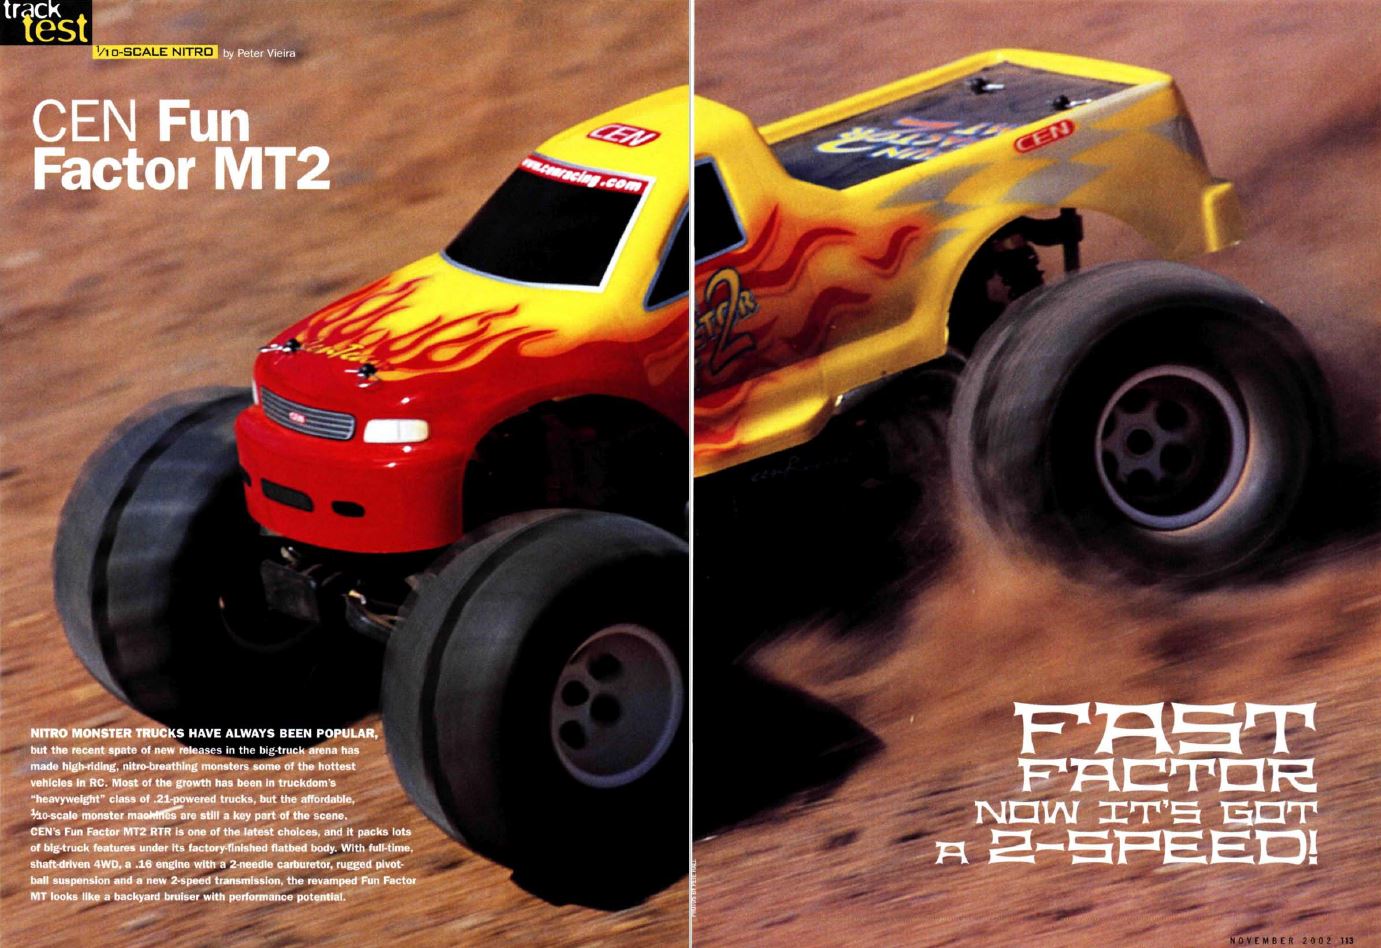 #TBT we though it might be "fun" to look back at the November 2002 issue